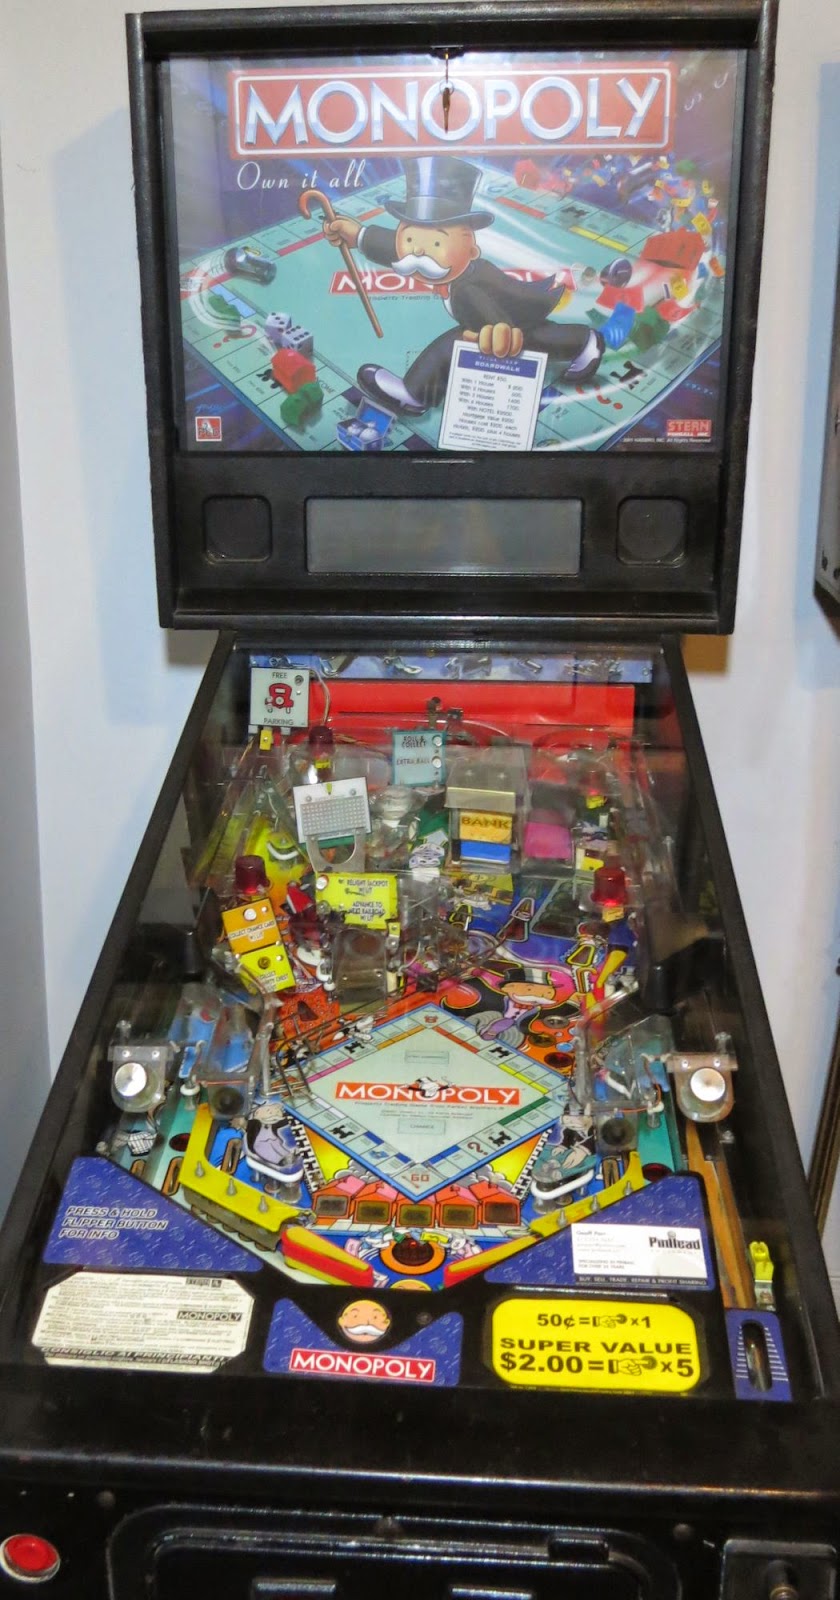 so I bought a pinball machine: introducing... Monopoly!